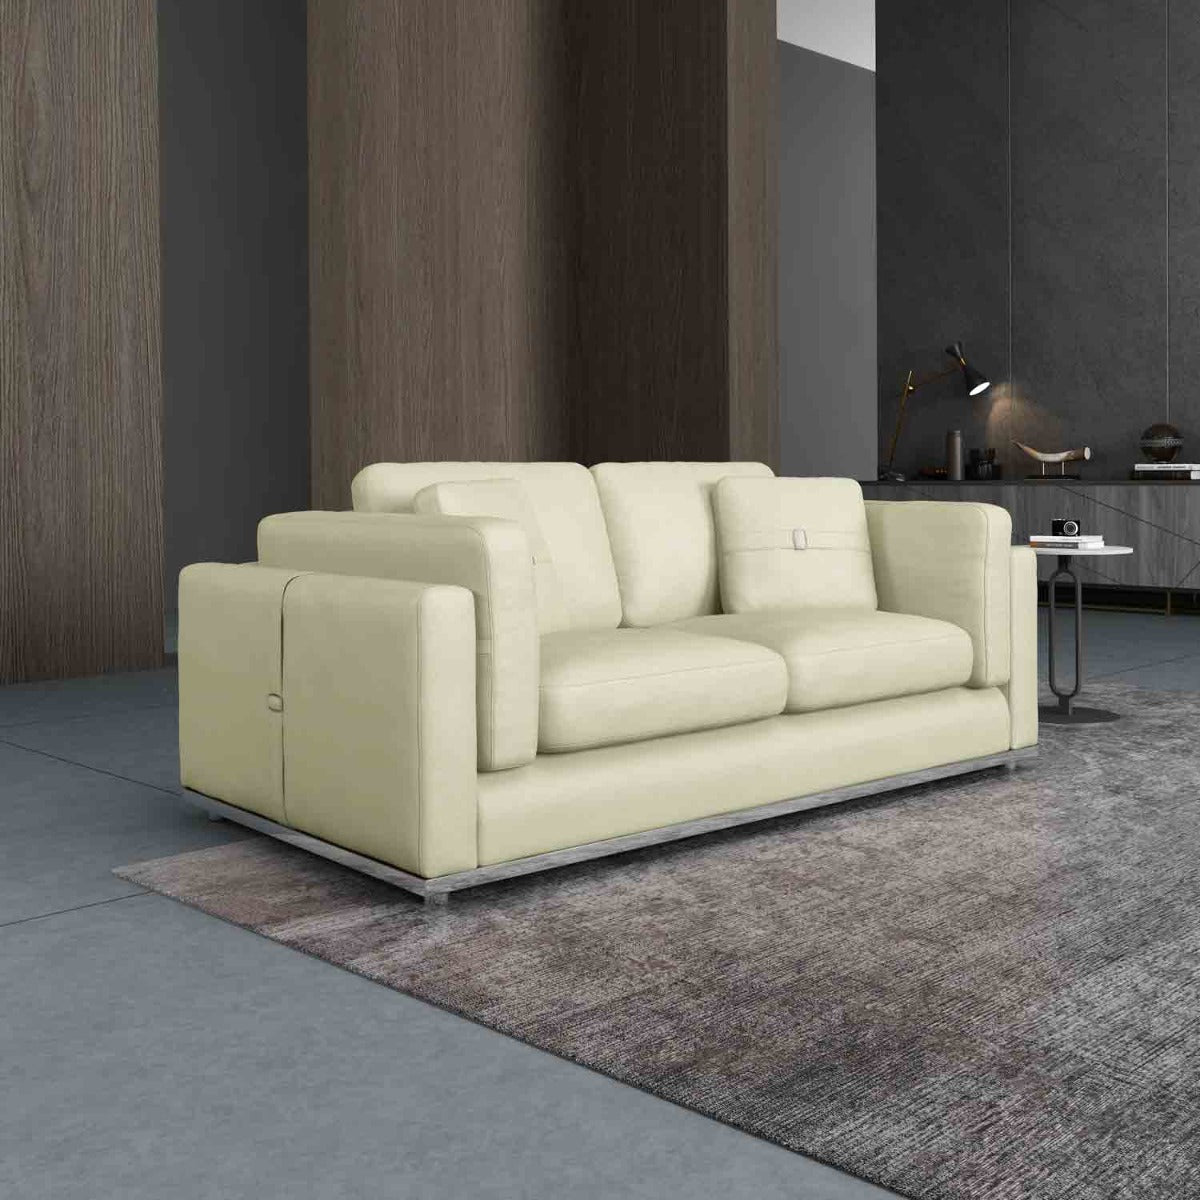 European Furniture - Picasso Loveseat in Off White - 25551-L - New Star Living